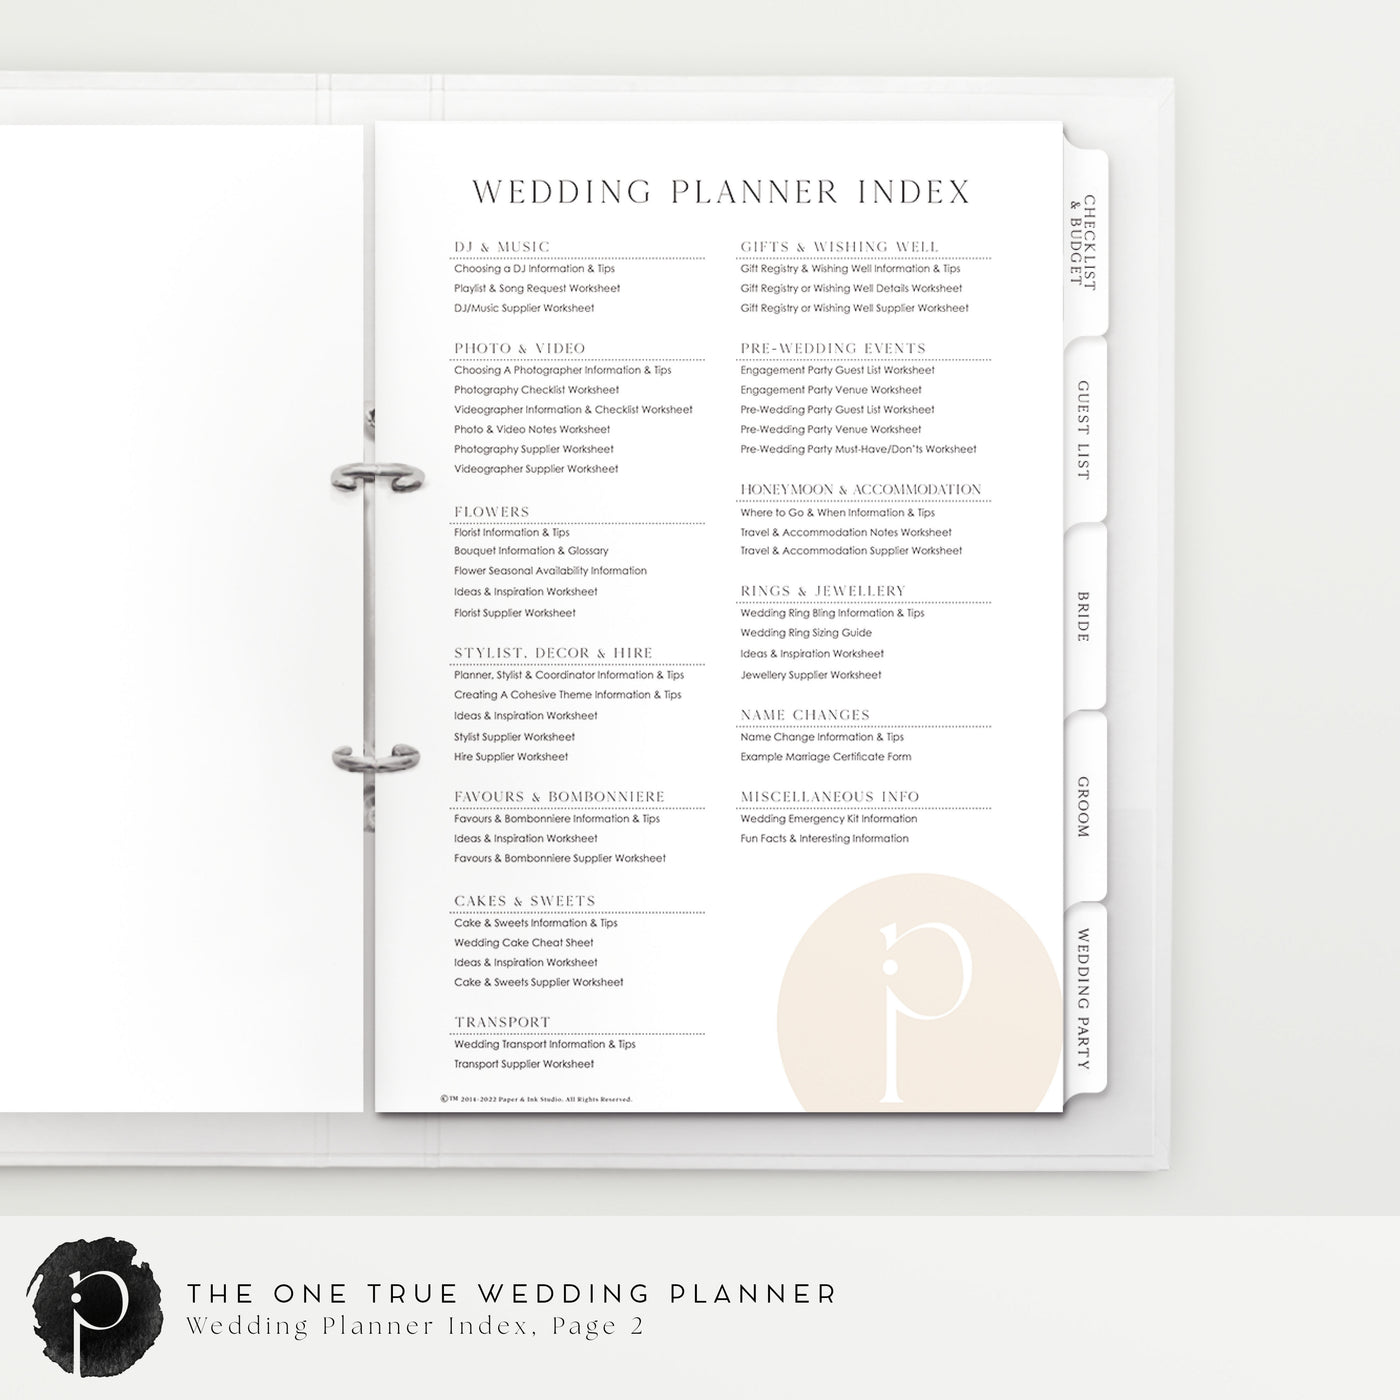 An example image of the second index page of the wedding planner and organiser made by Paper and Ink Studio, with a list of all the wedding information and wedding planning tools included in it.